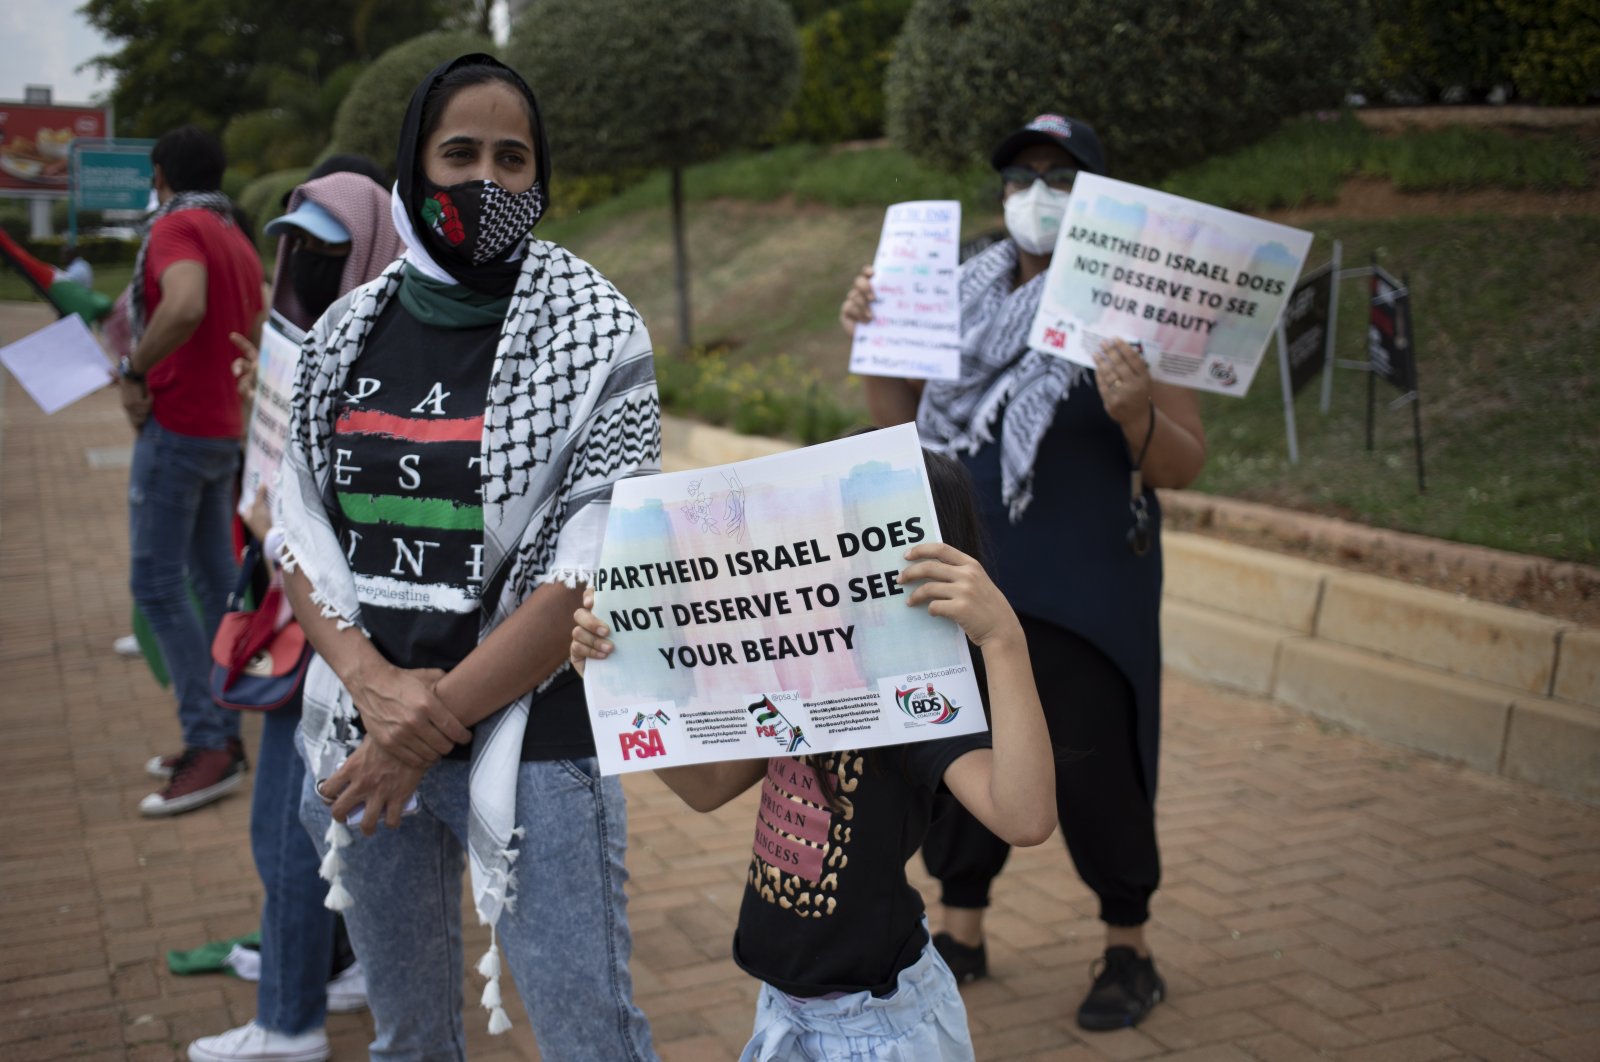 Pro-Palestine supporters protest outside the offices of Miss South Africa, Johannesburg, South Africa, Nov. 12, 2021. (EPA Photo)